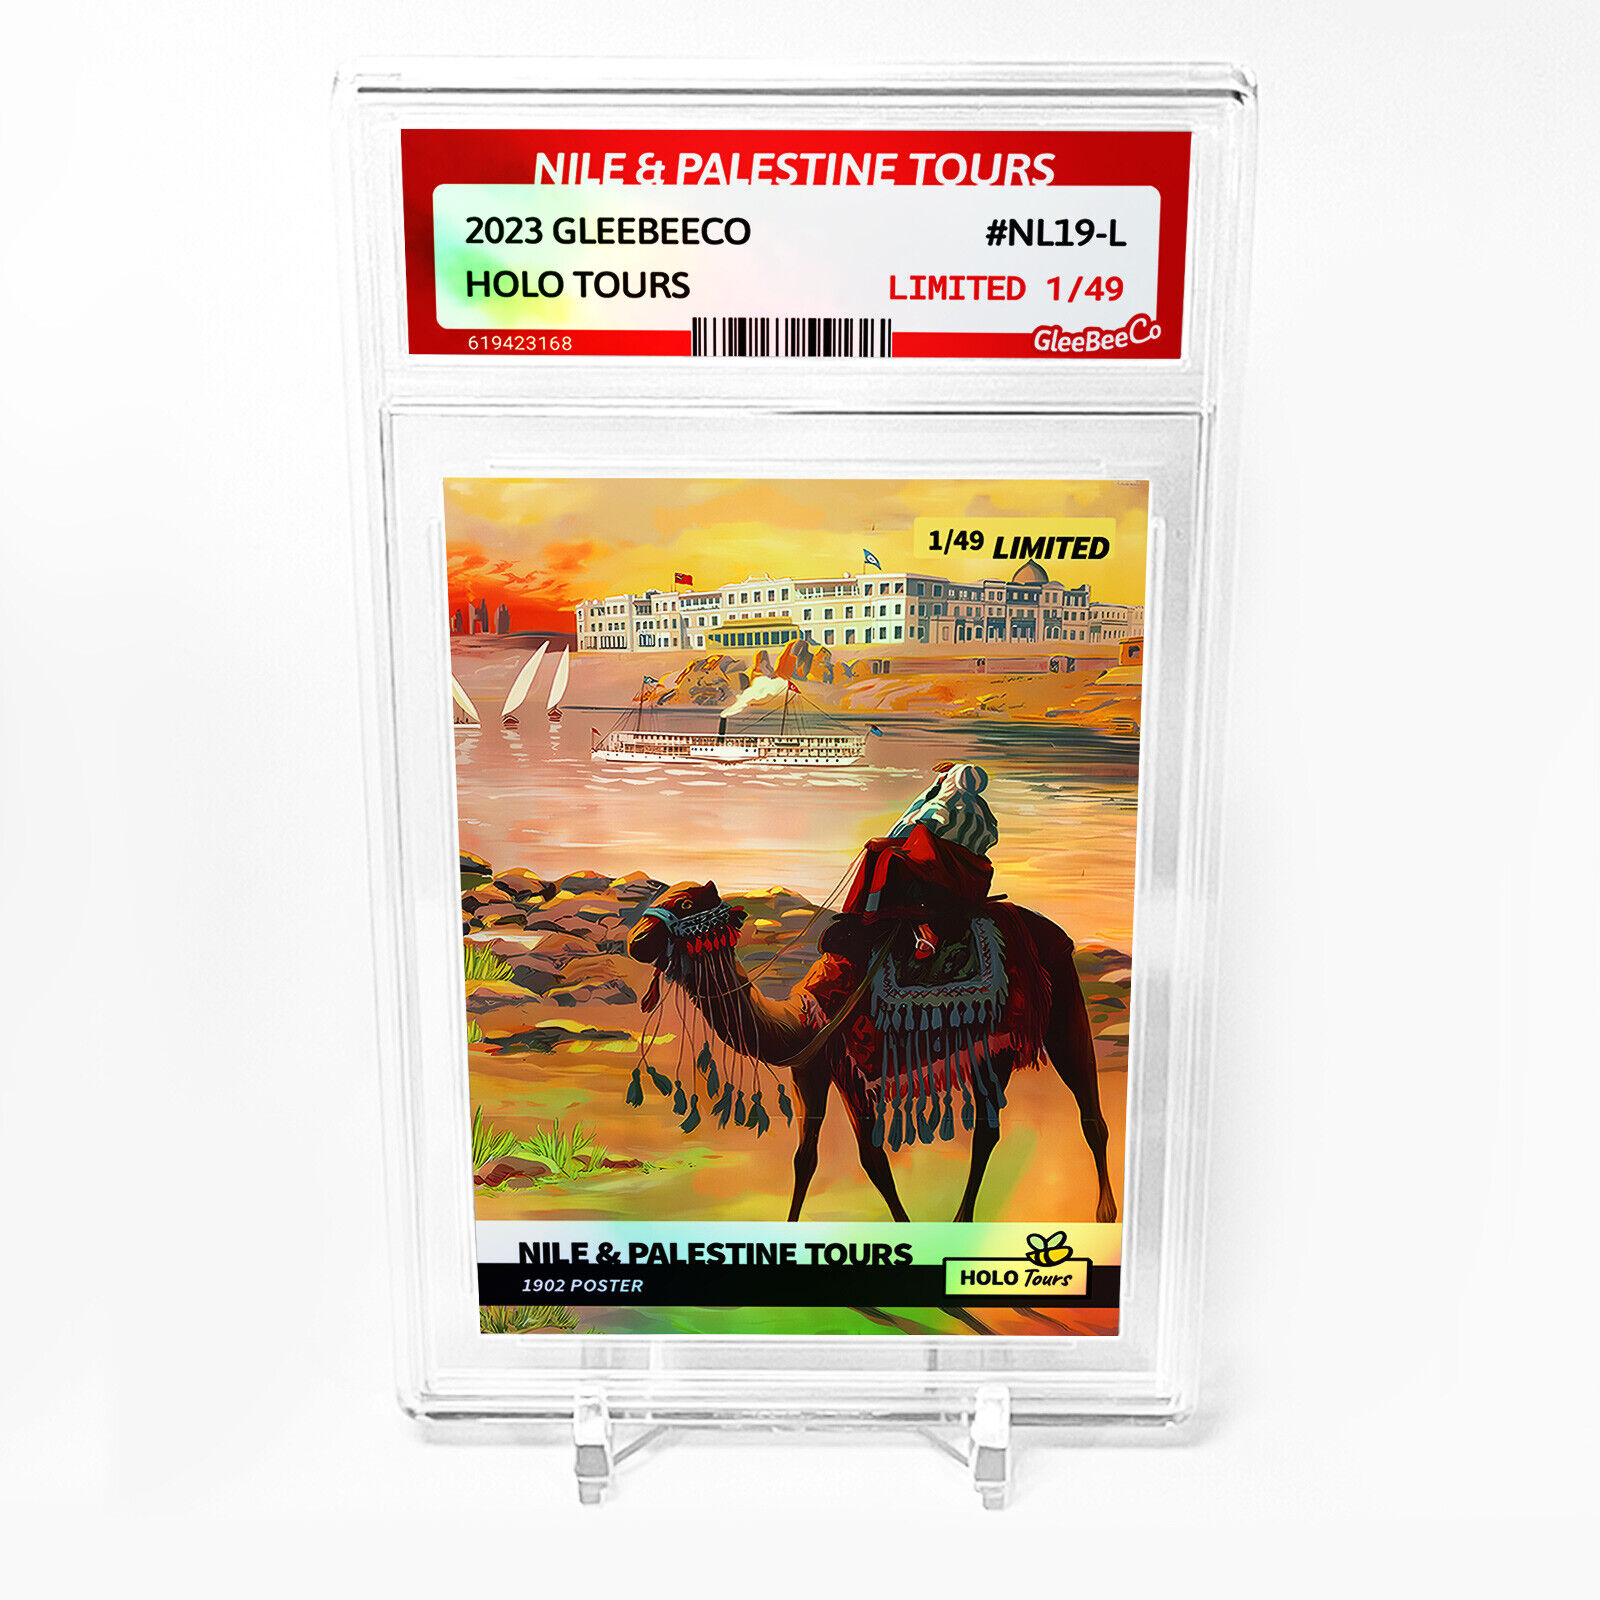 NILE AND PALESTINE TOURS Card 2023 GleeBeeCo 1902 Poster Holographic #NL19-L /49